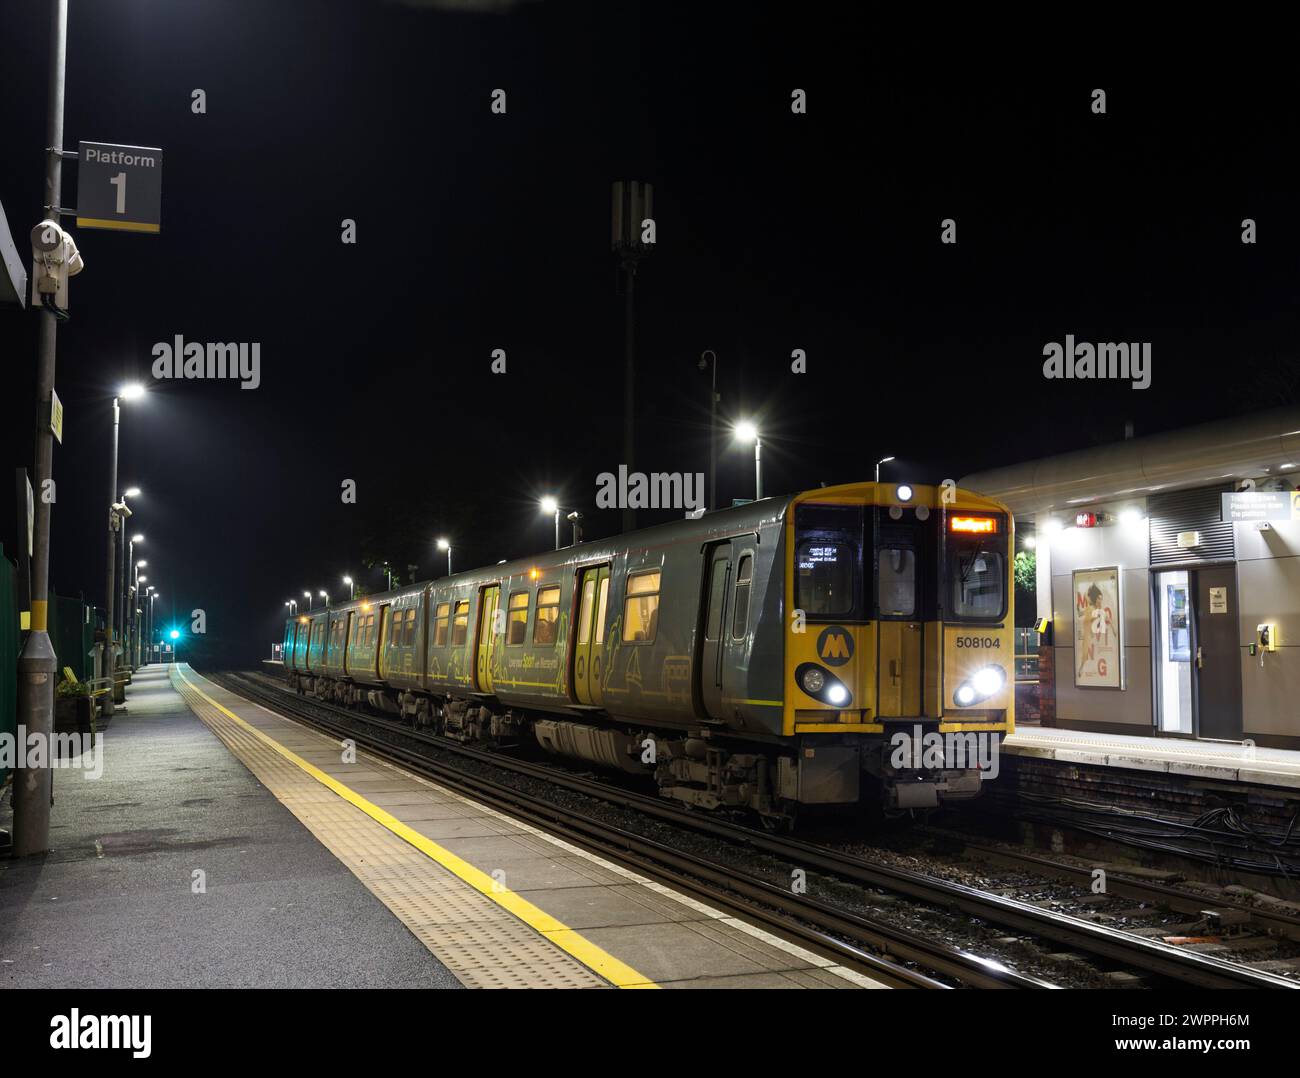 Merseyrail electrics class 508 third rail electric train 508104 at Ainsdale railway station, Southport, UK at night Stock Photo